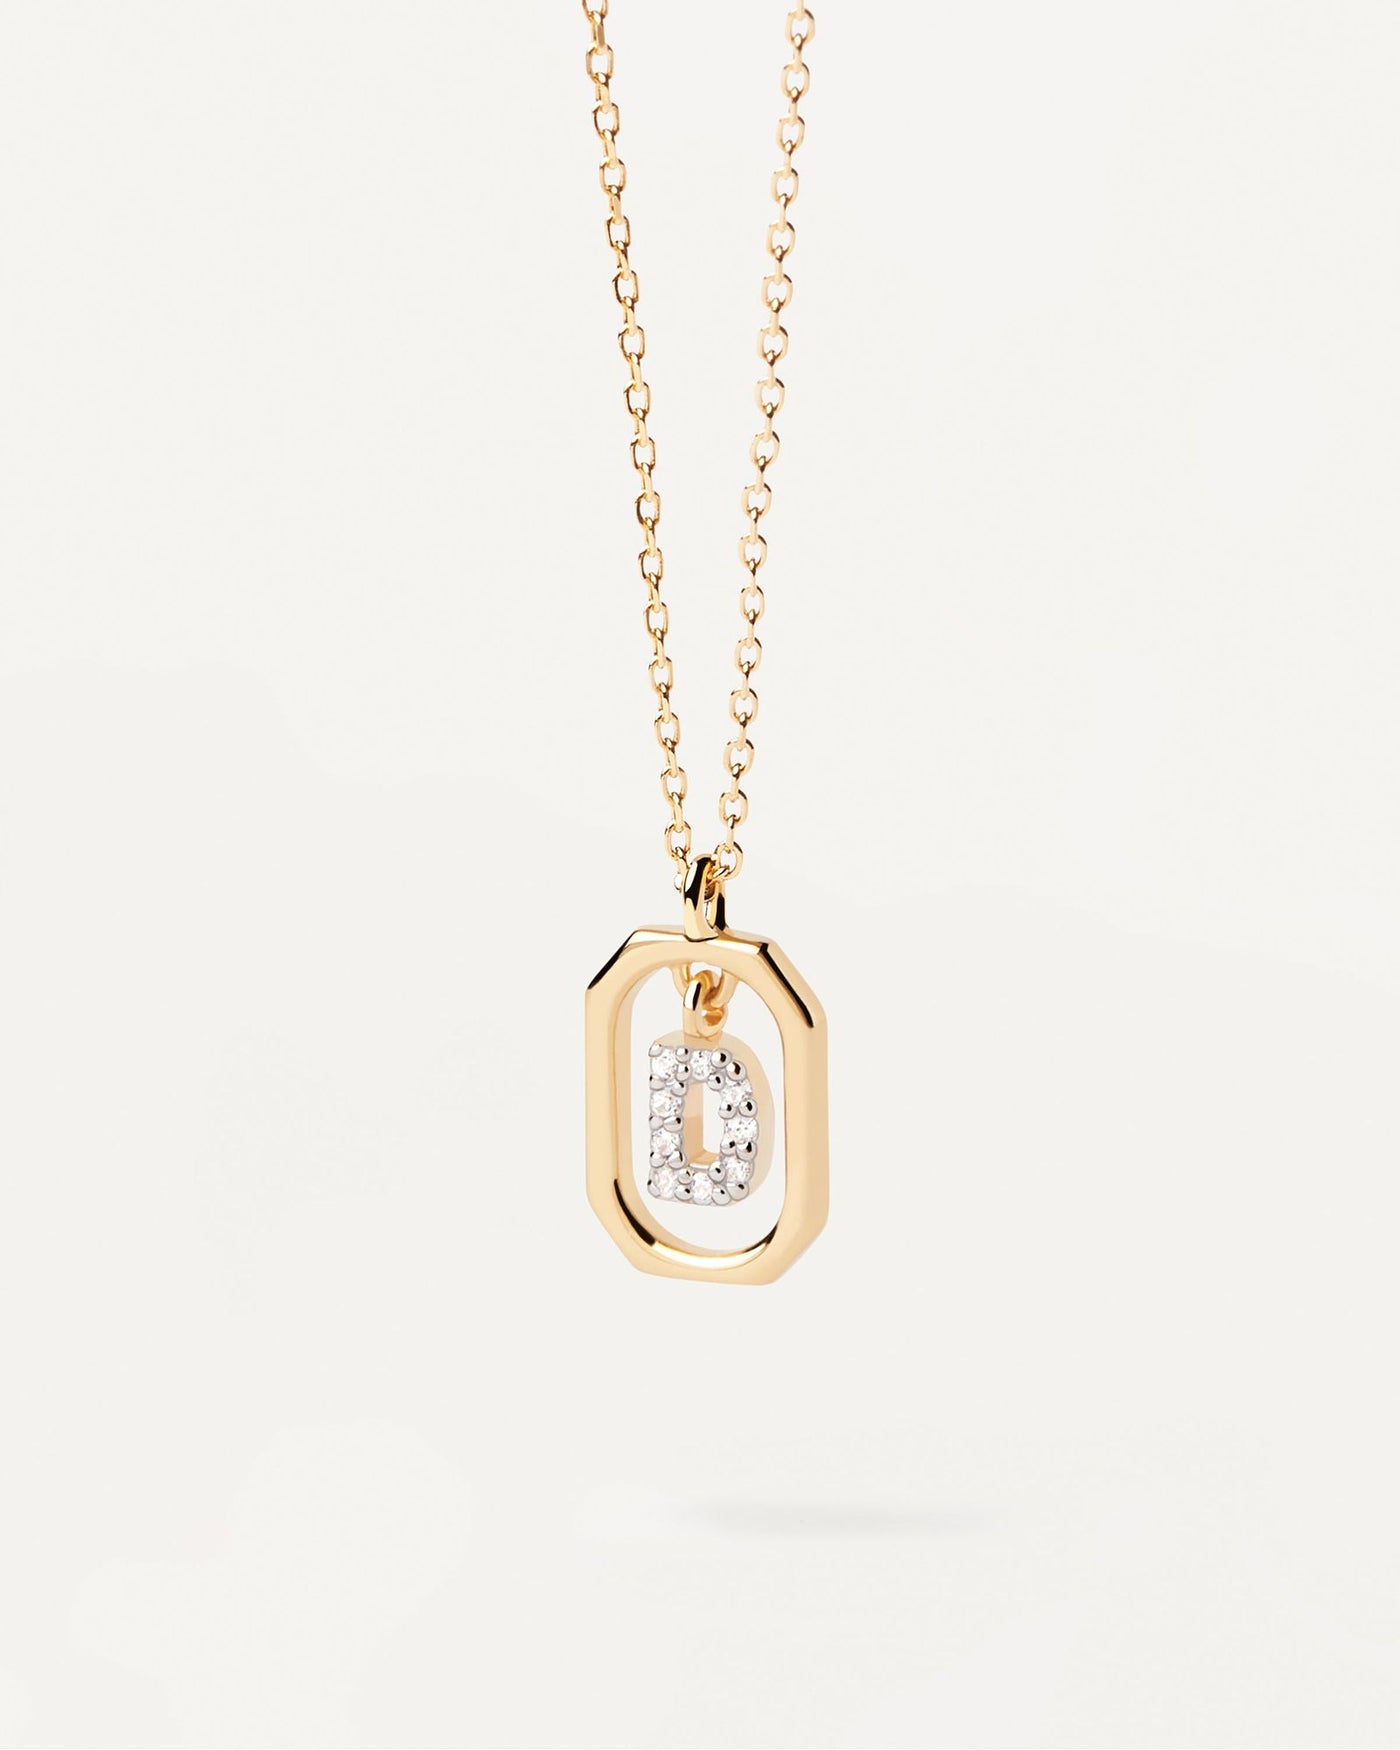 2024 Selection | Mini Letter D Necklace. Small initial D necklace in zirconia inside gold-plated silver octagonal pendant. Get the latest arrival from PDPAOLA. Place your order safely and get this Best Seller. Free Shipping.